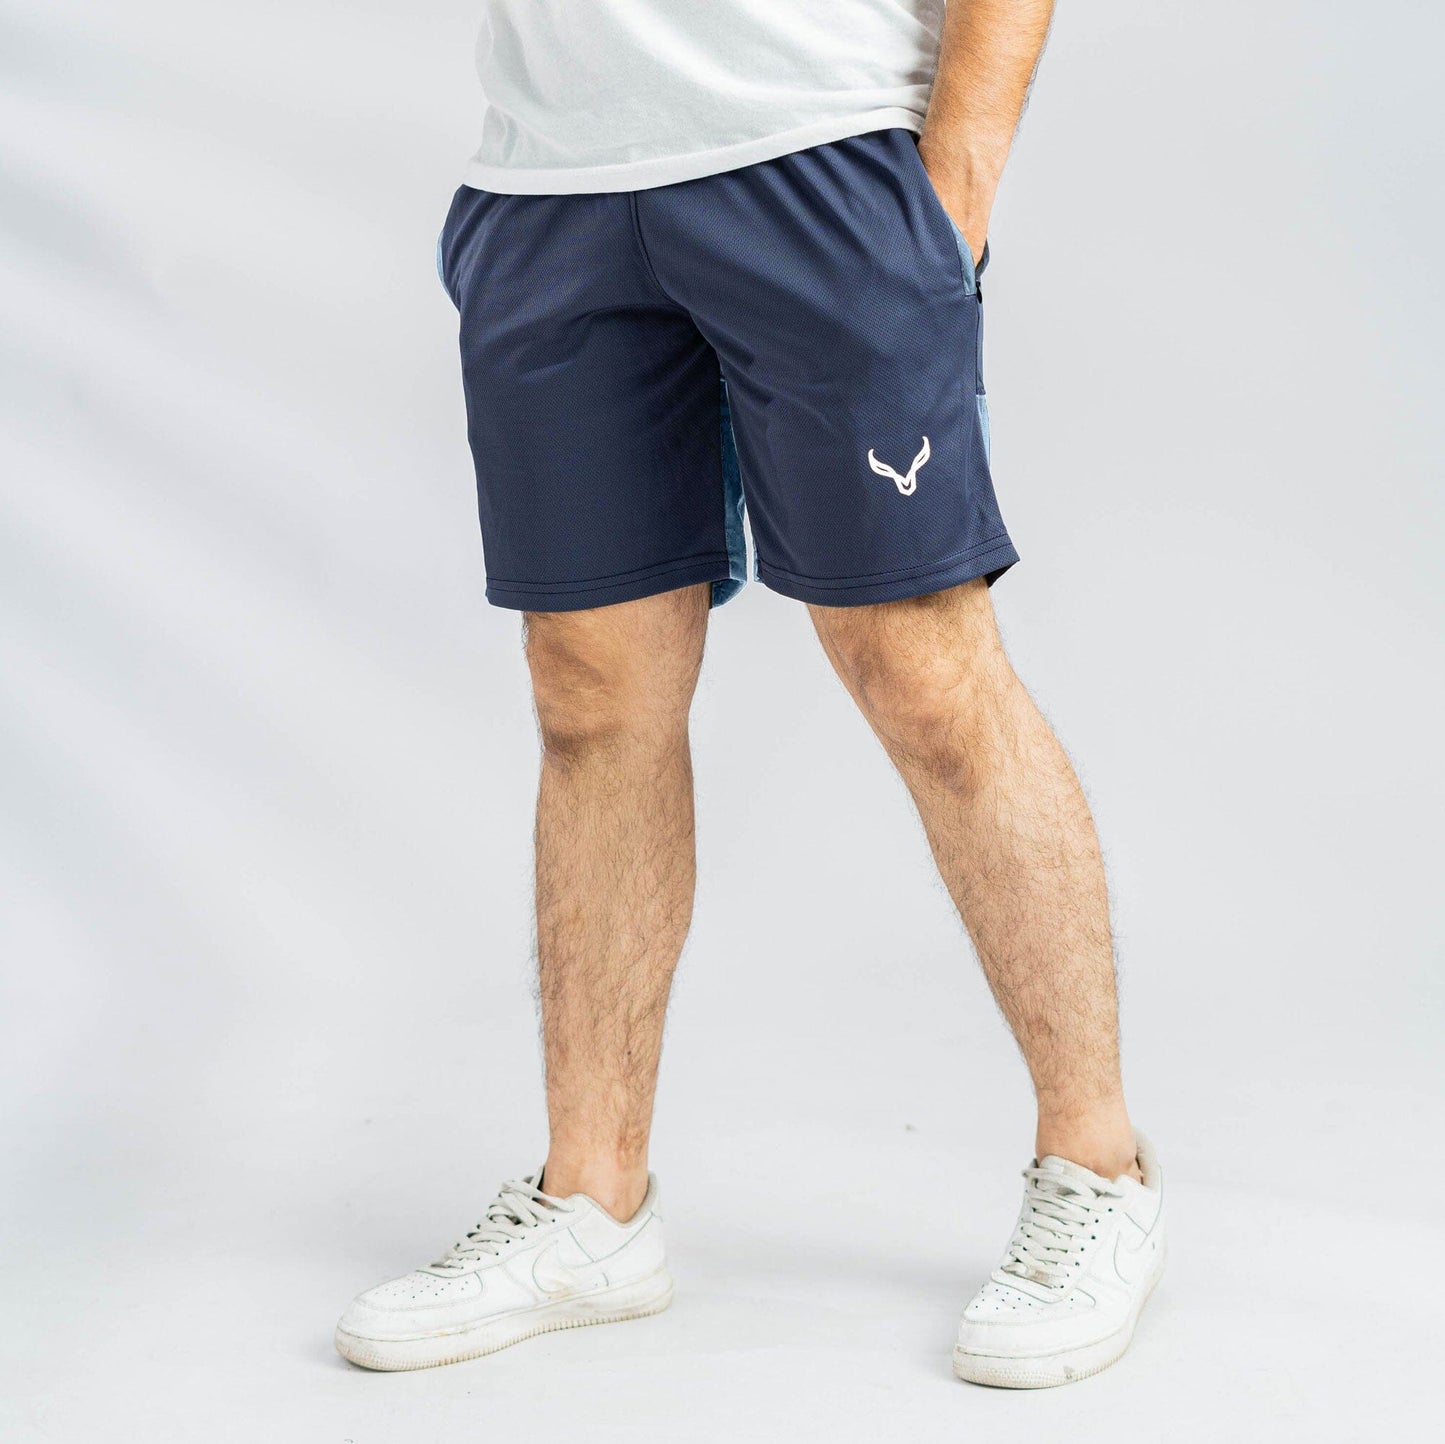 Polo Athletica Men's Rapid-Dry Gym Activewear Shorts with Side Panel Men's Shorts Polo Republica Navy & Sky S 